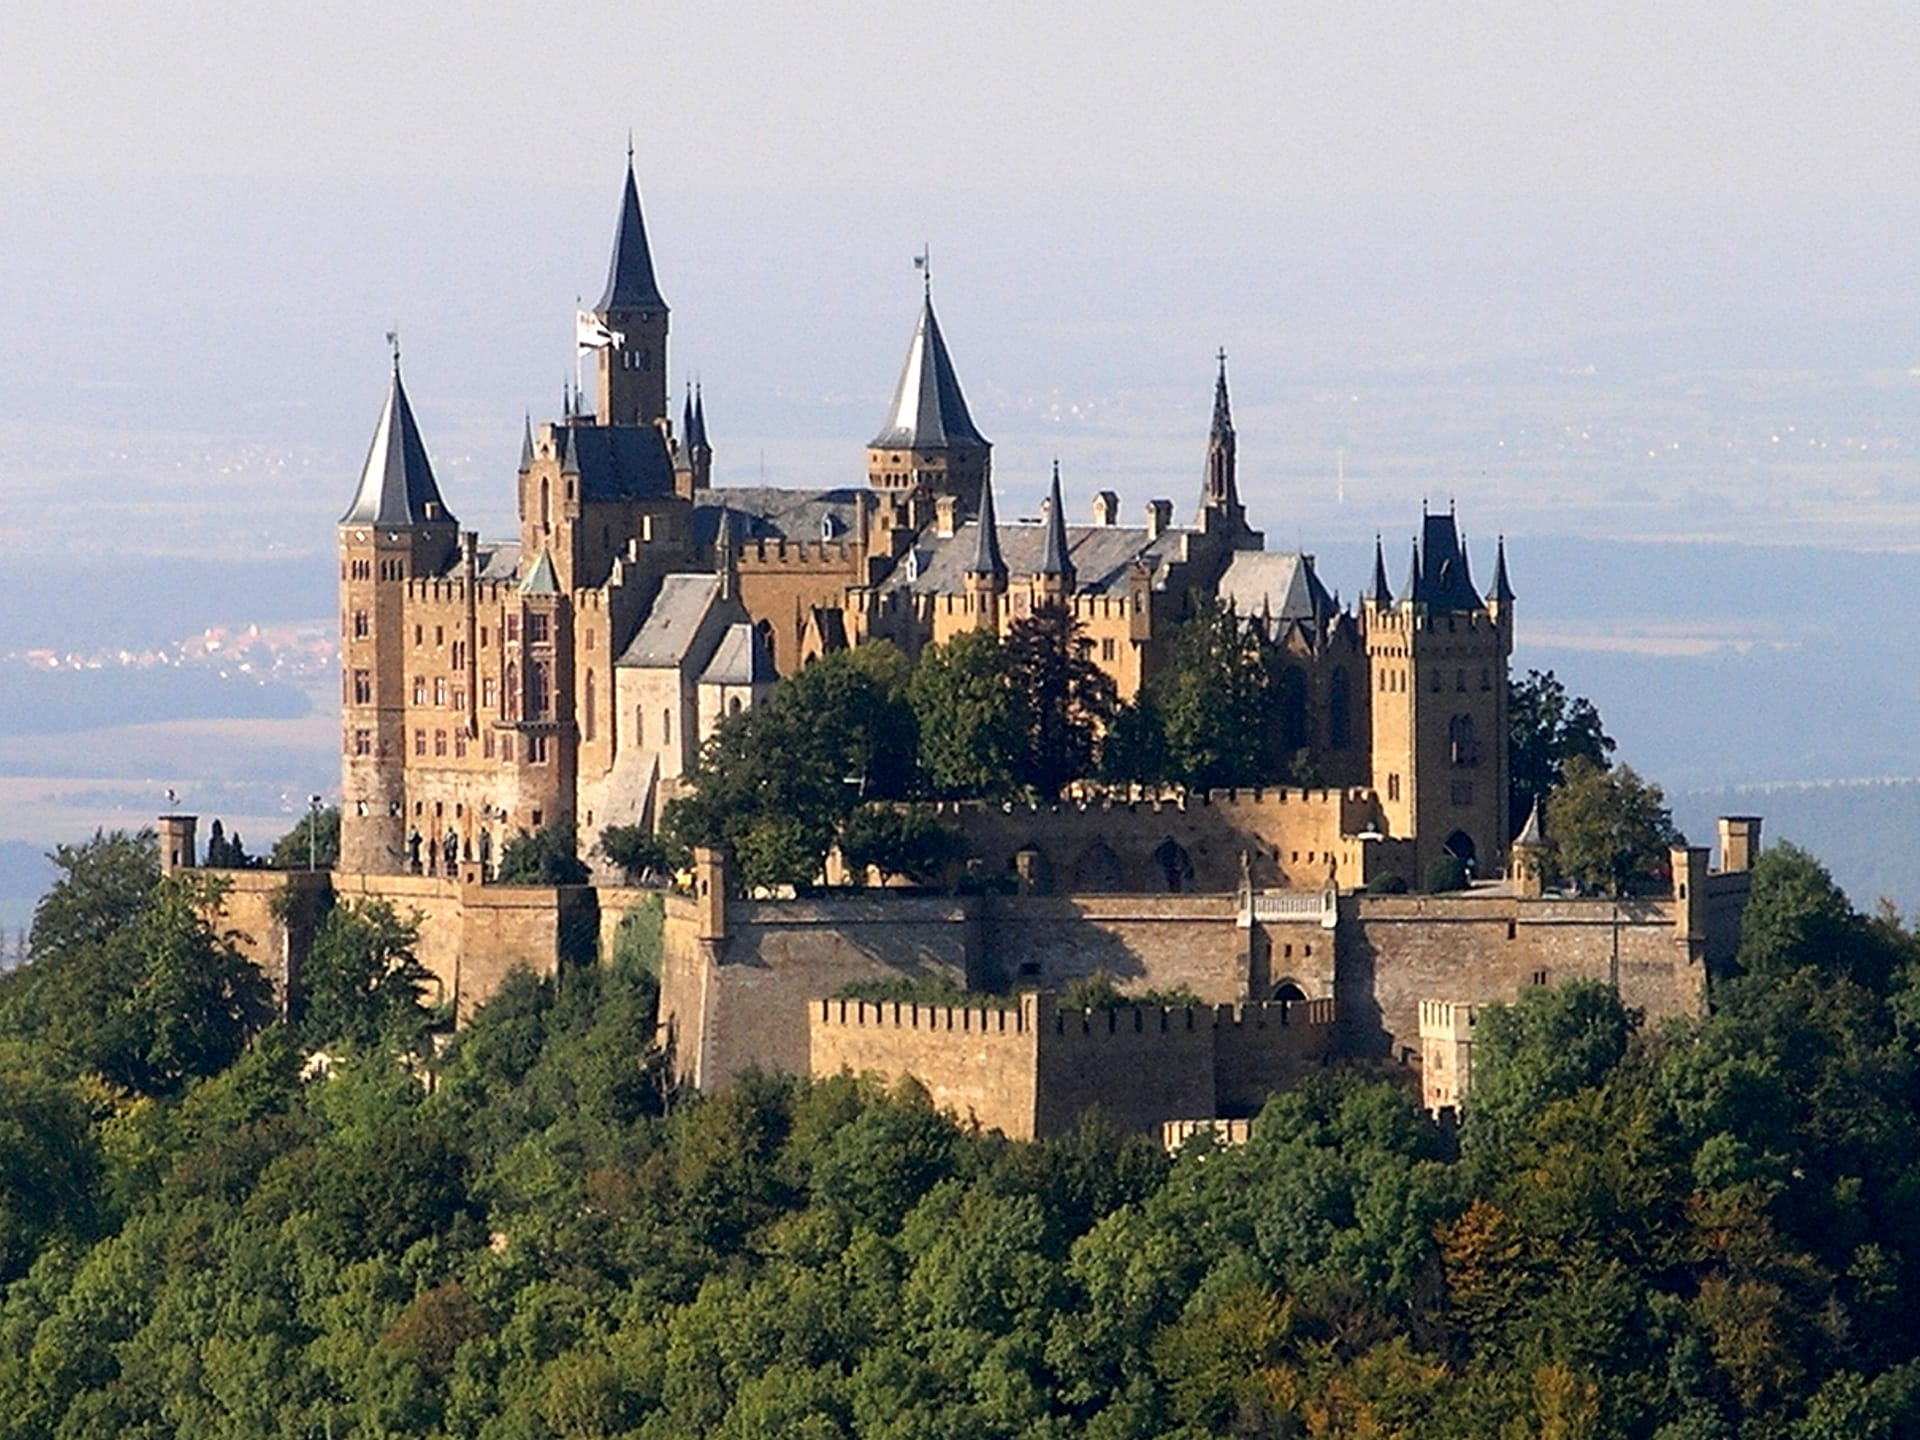 Hohenzollern Castle, Germany; a famous enchanting castle